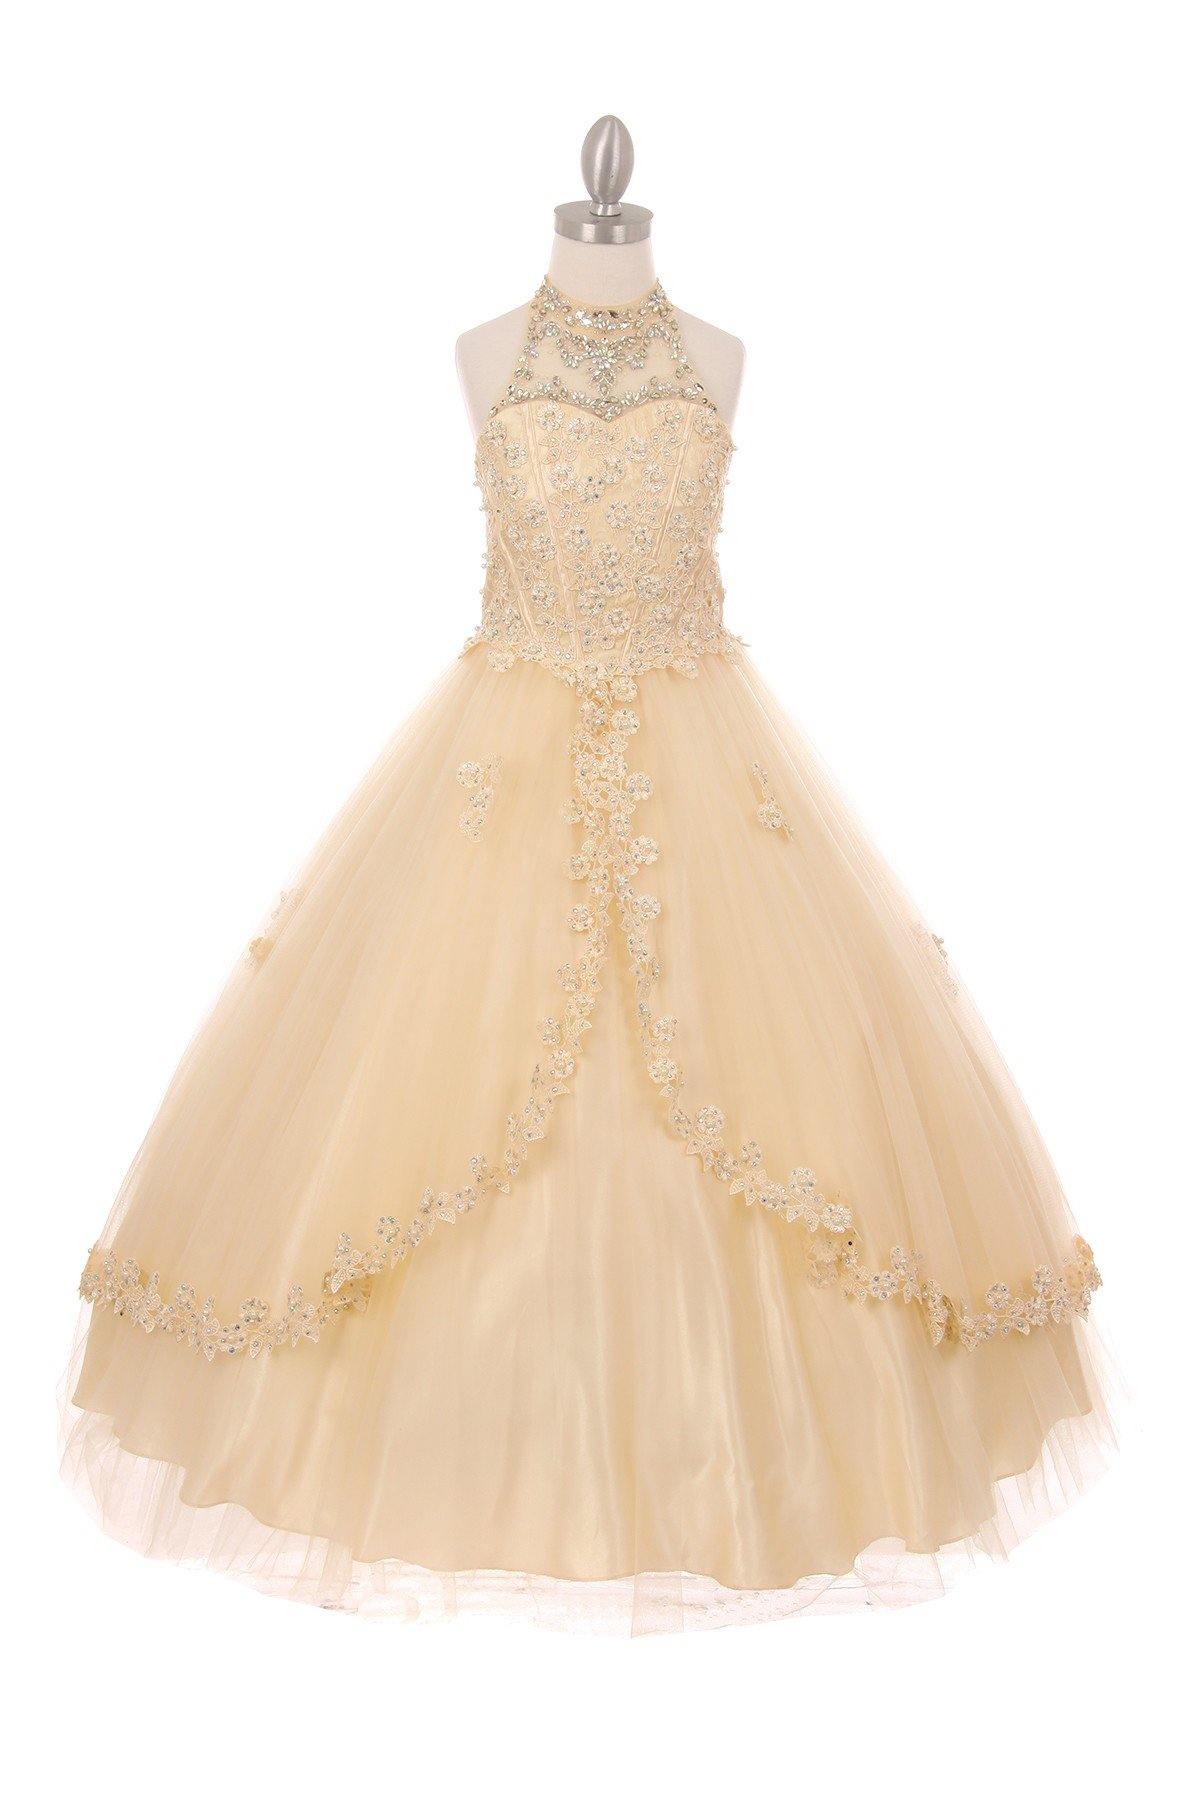 Beaded Halter Style Long Gown Flower Girl Dress - The Dress Outlet Cinderella Couture